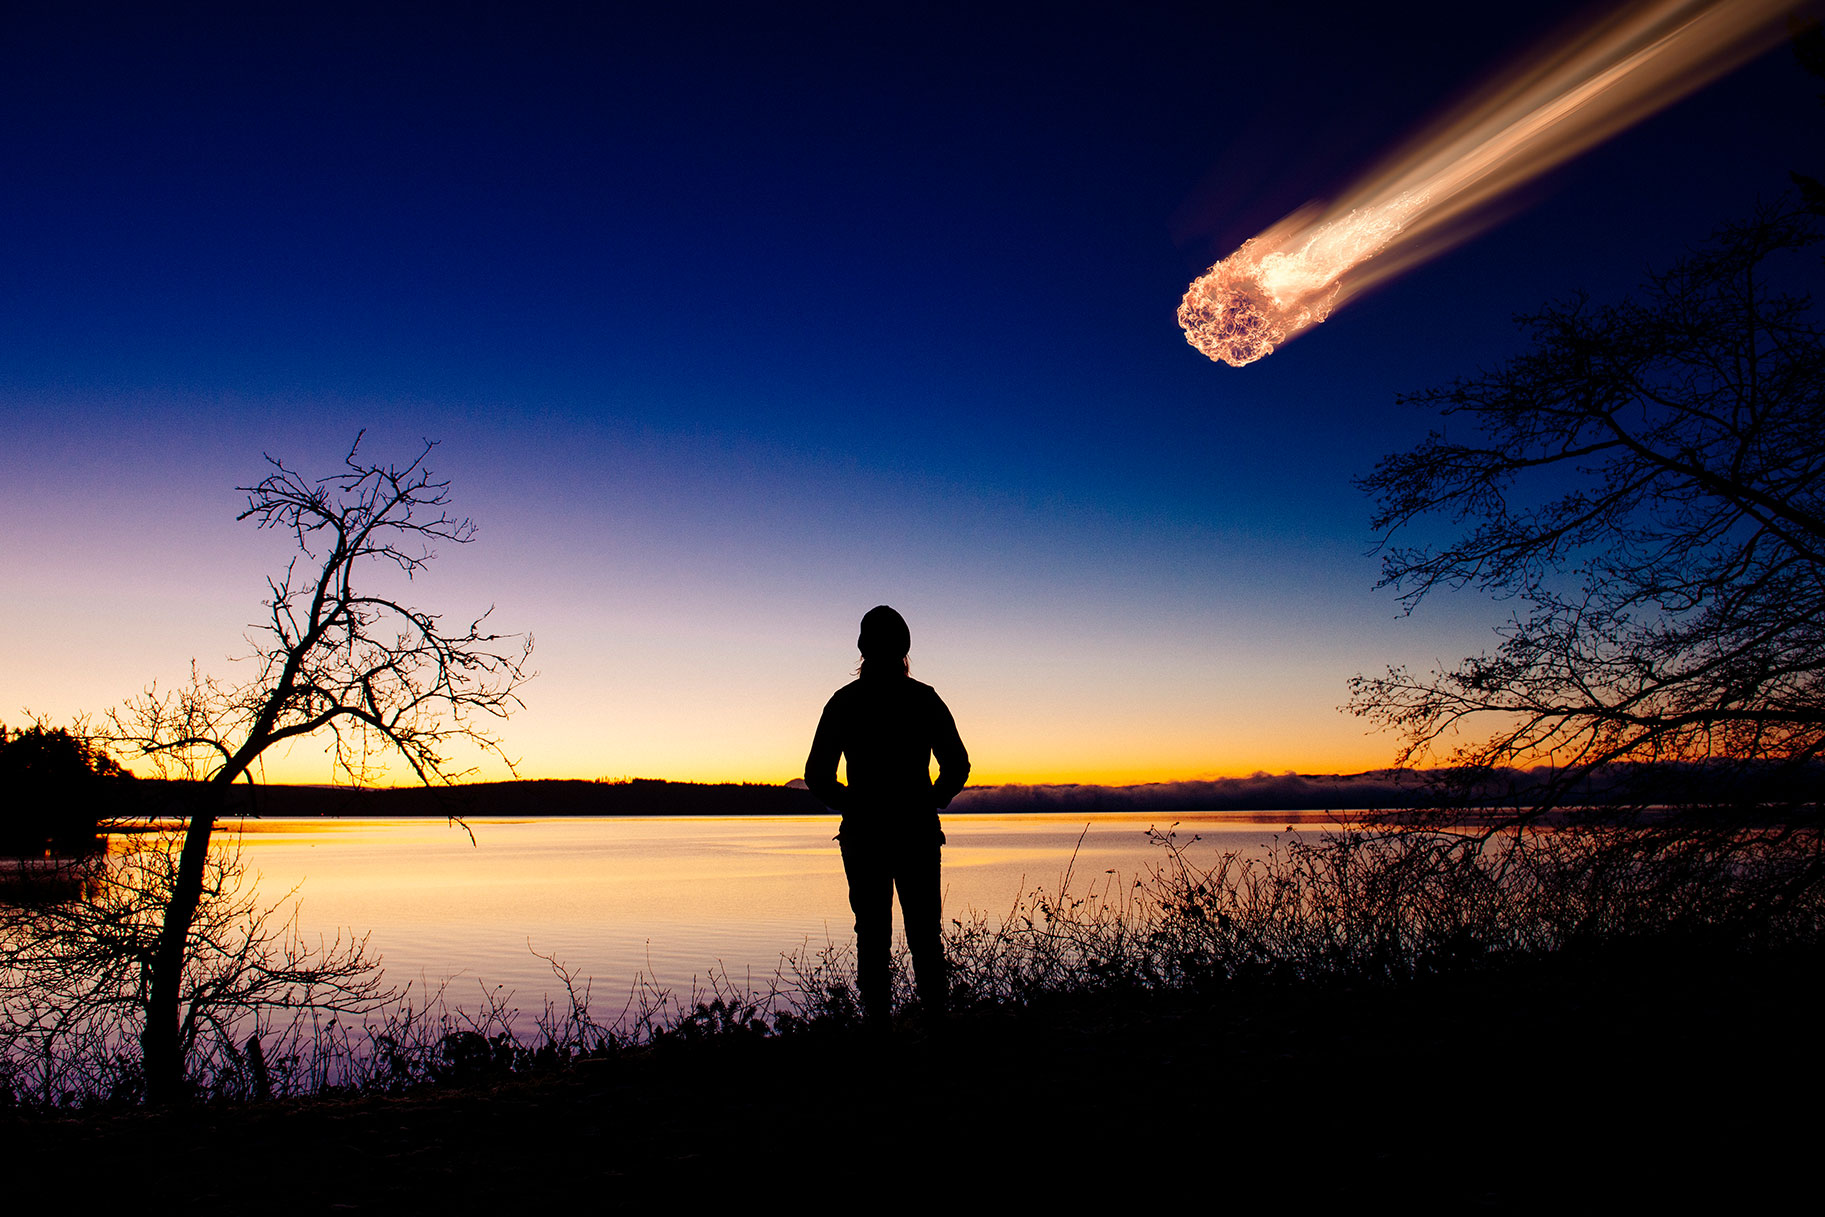 Woman watching a meteor in the sky